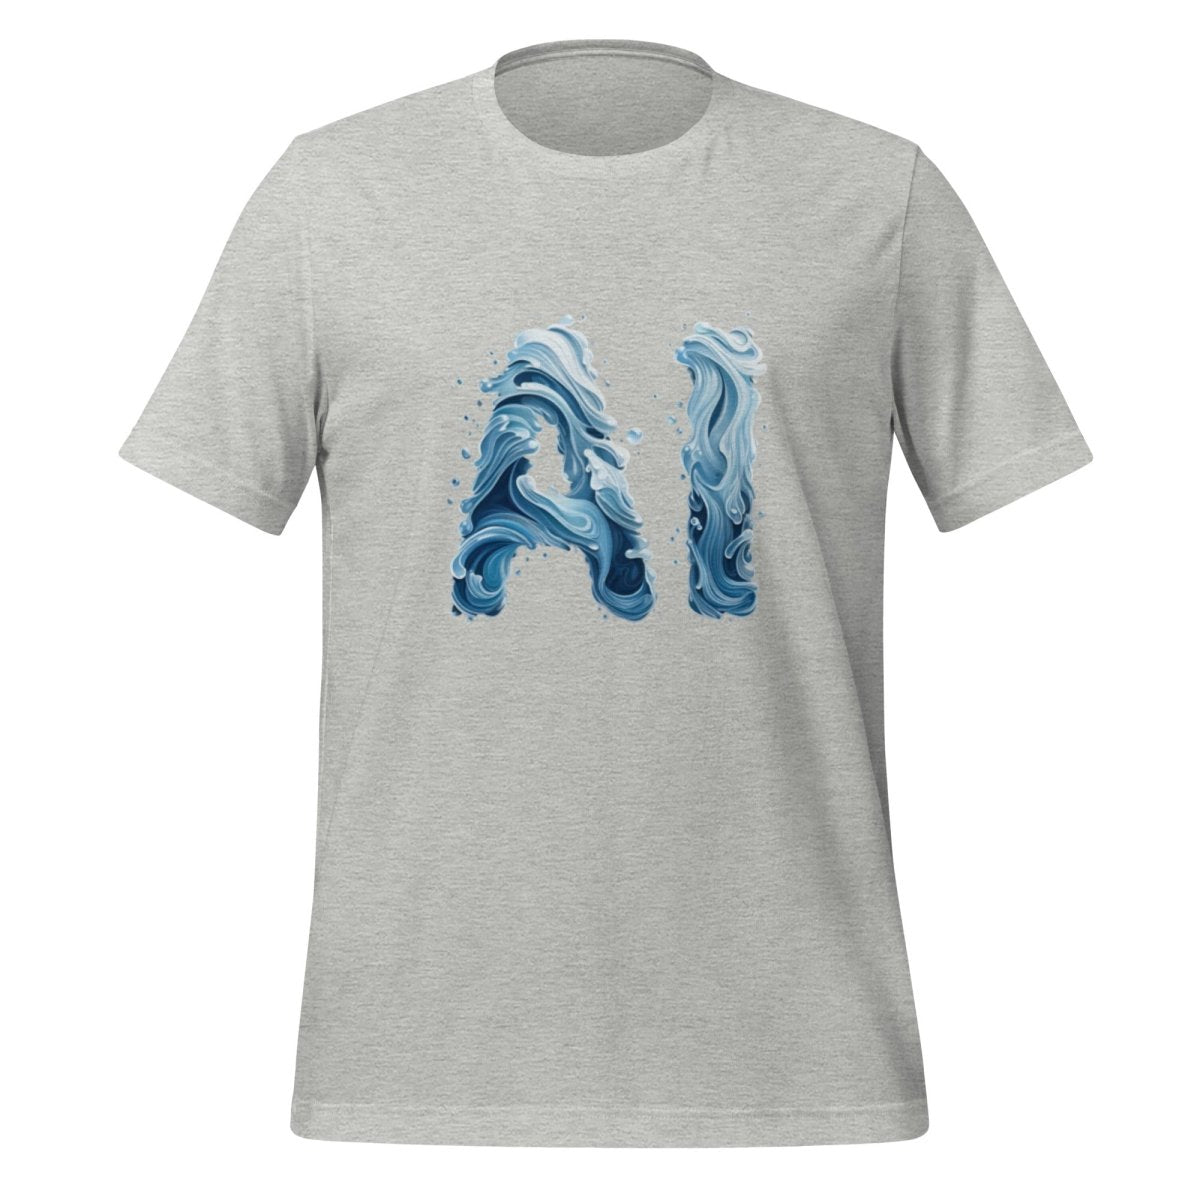 Water AI T - Shirt (unisex) - Athletic Heather - AI Store